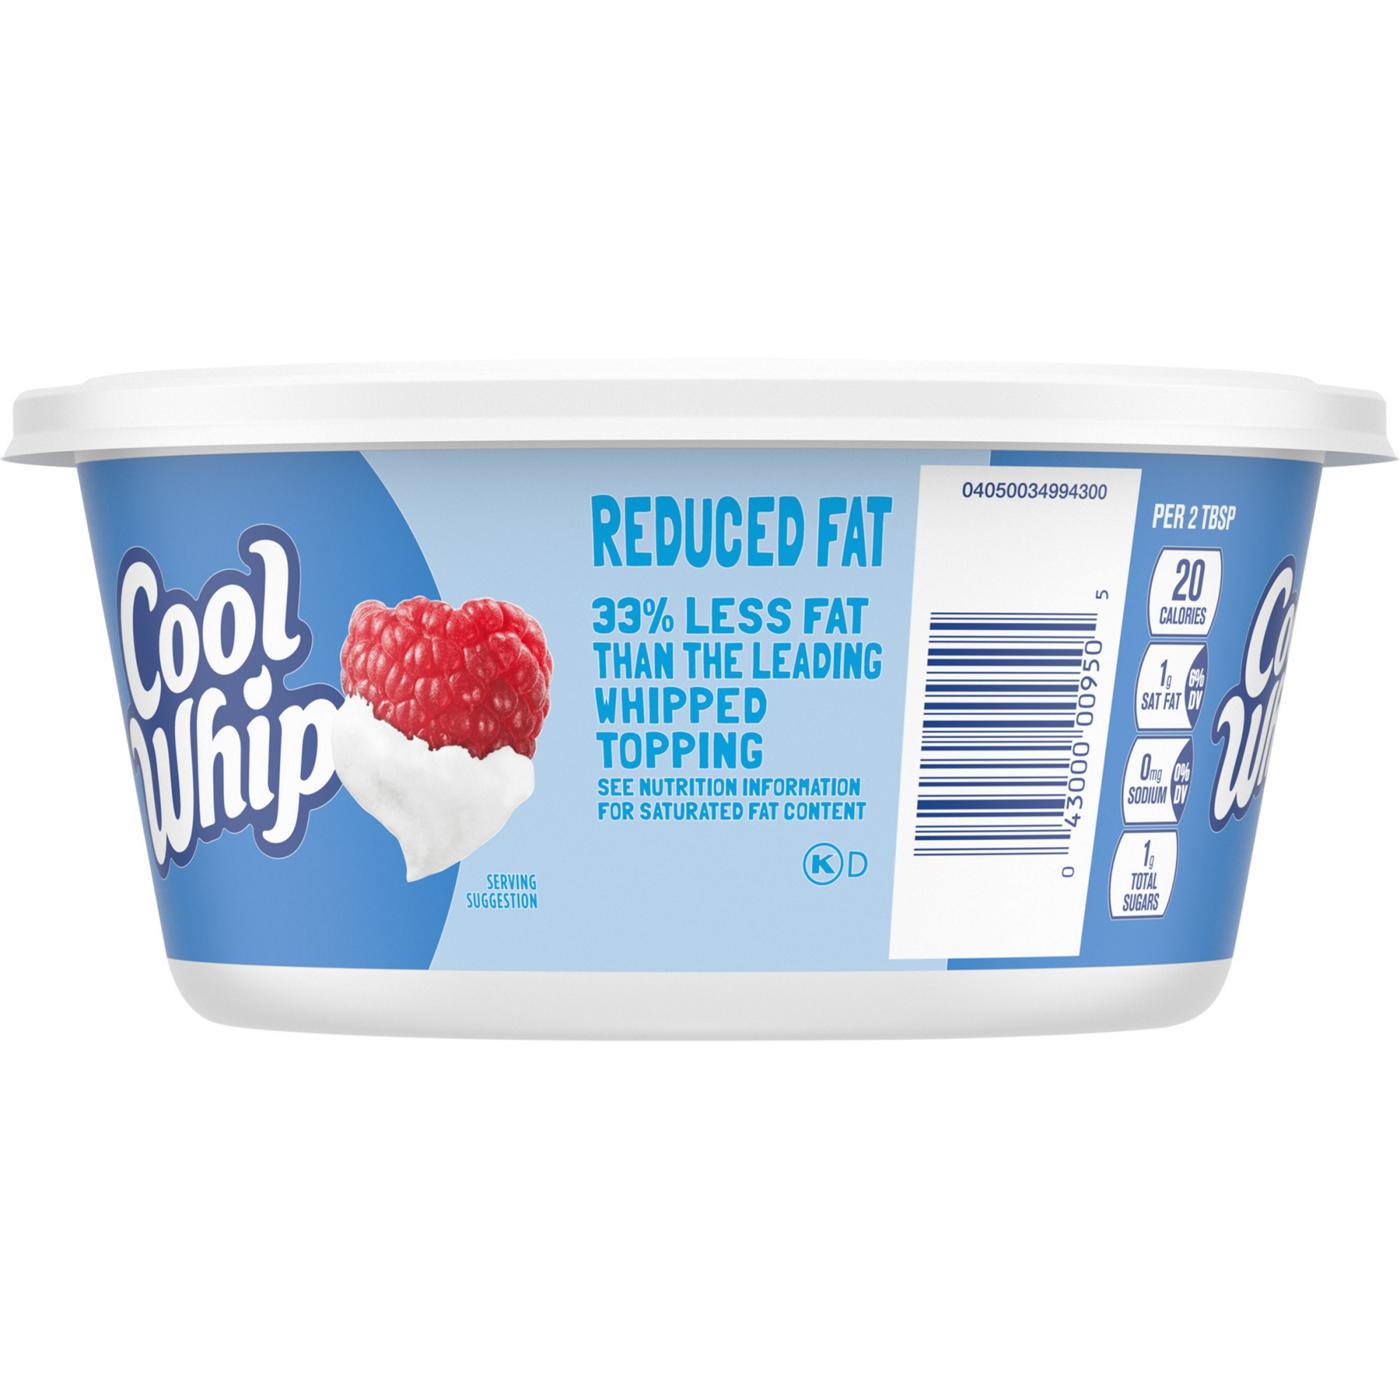 Kraft Cool Whip Reduced Fat Whipped Topping; image 8 of 9